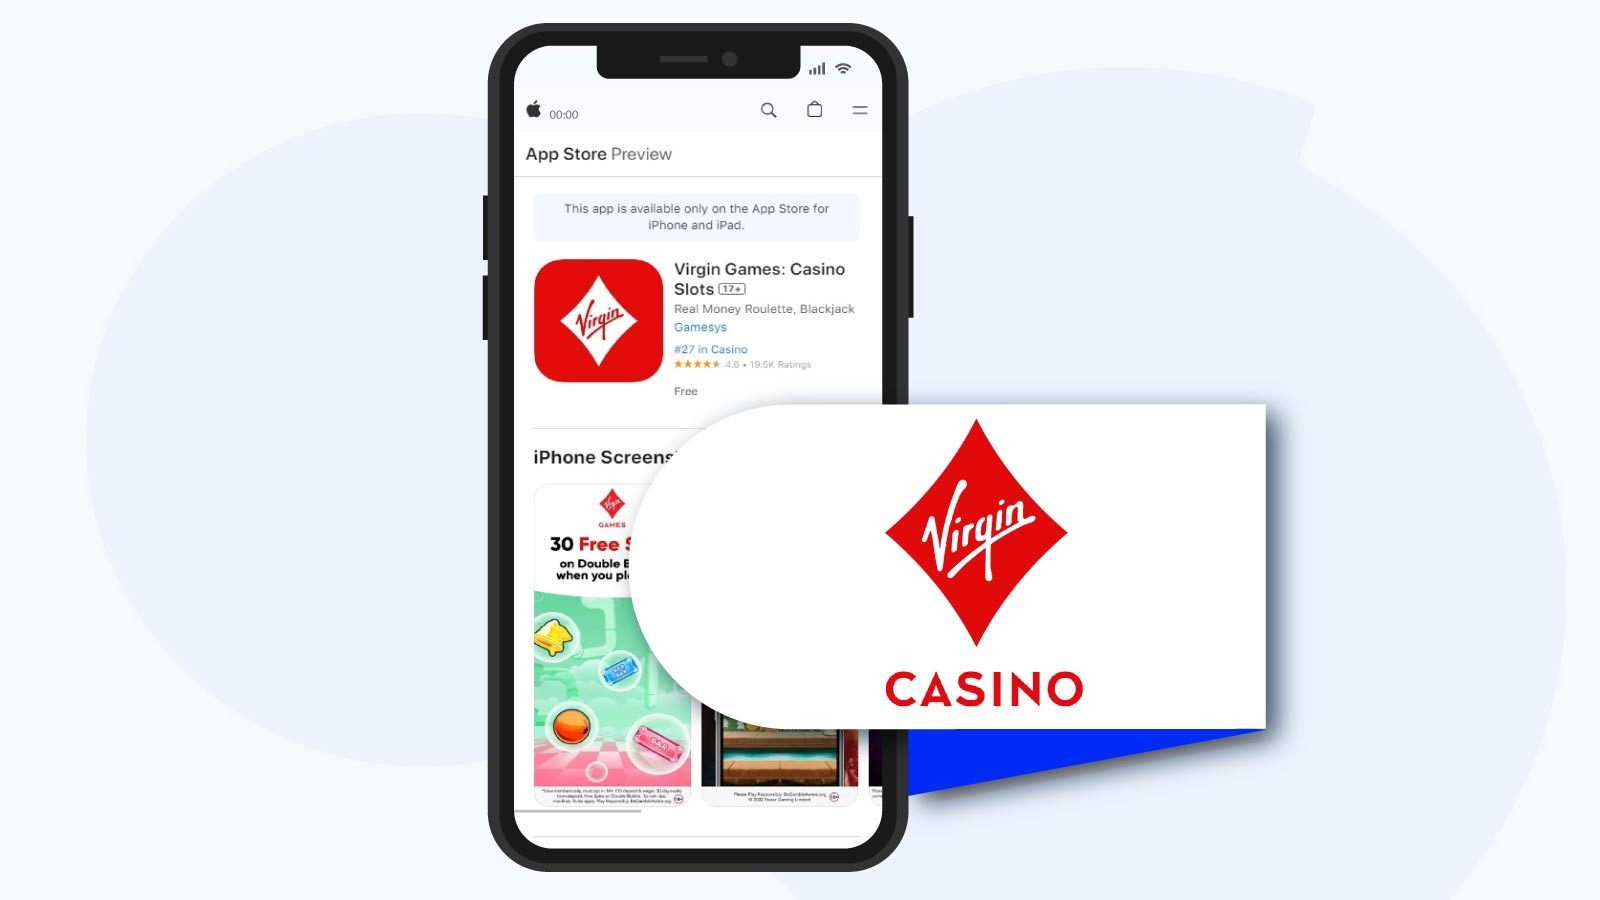 Virgin-Games Best-mobile-casino-app-for-iPhone-users